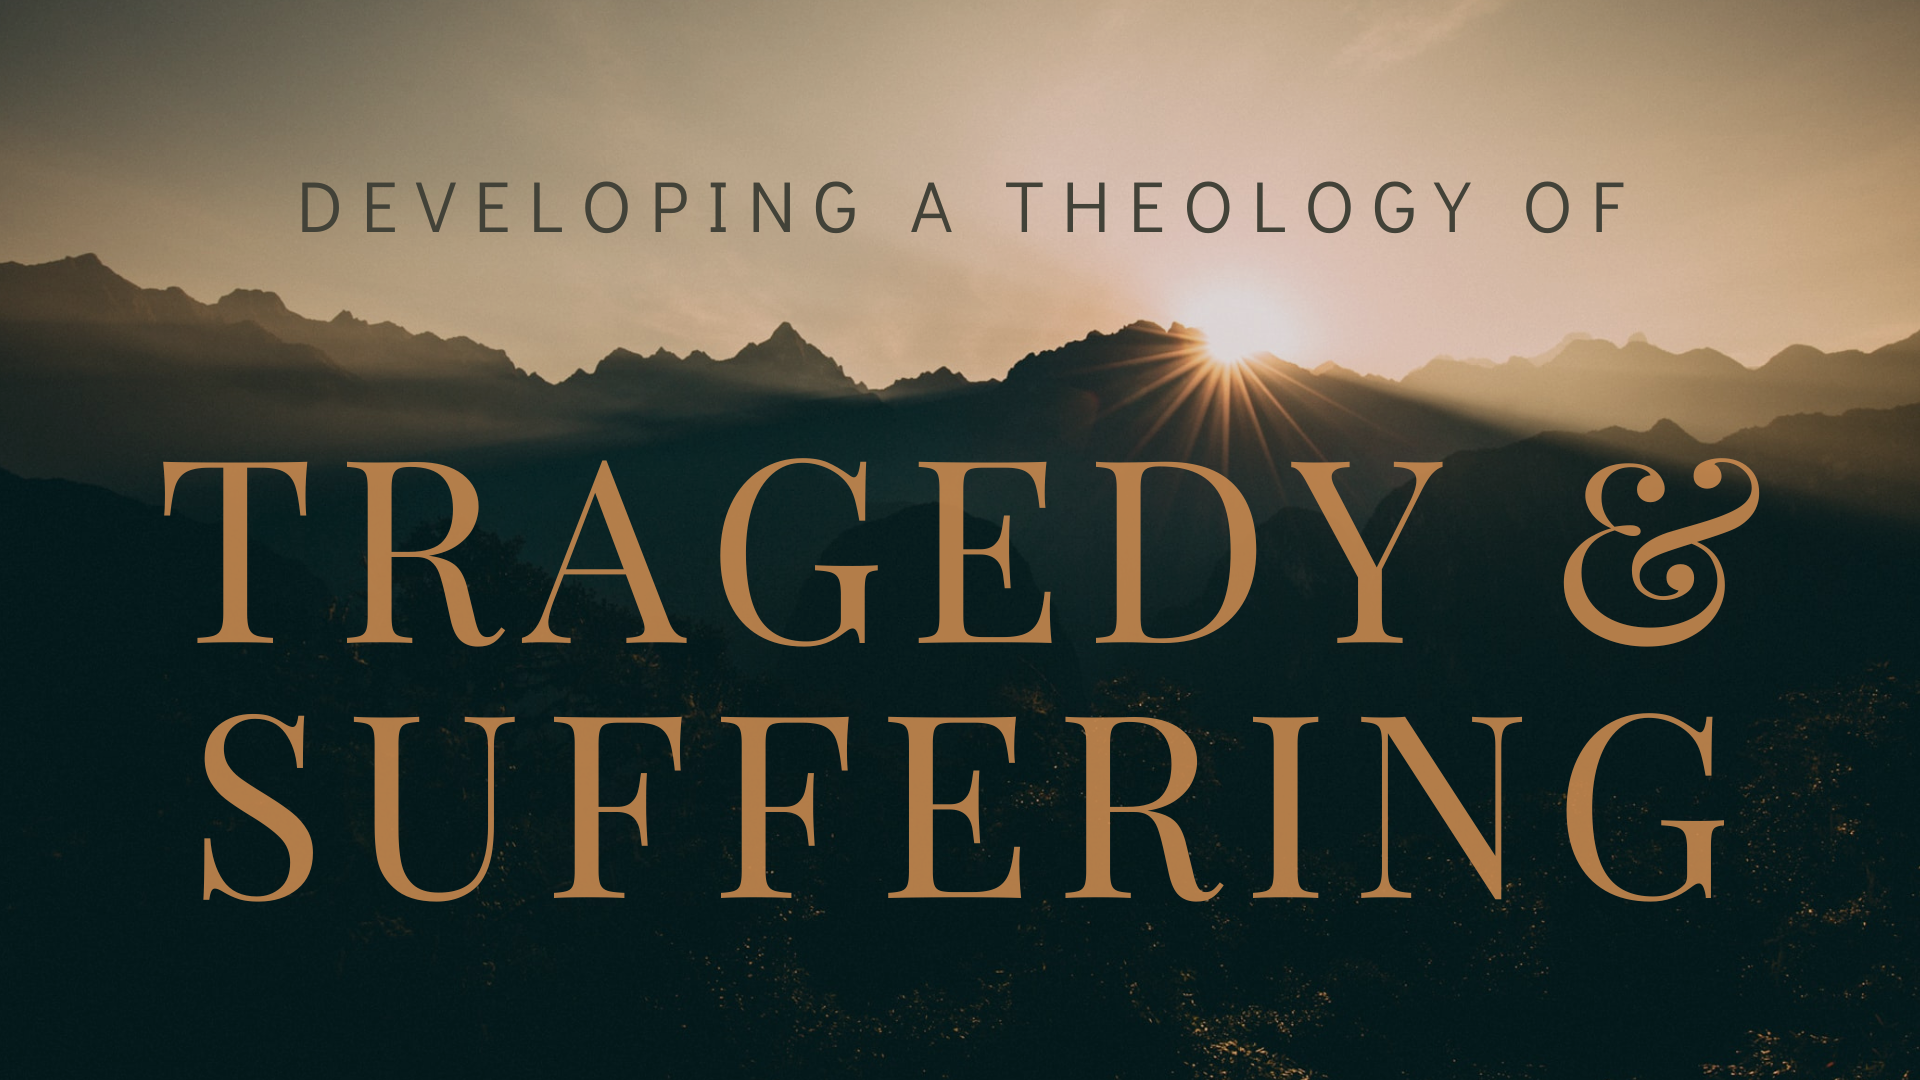 A Theology of Tragedy and Suffering Part 2